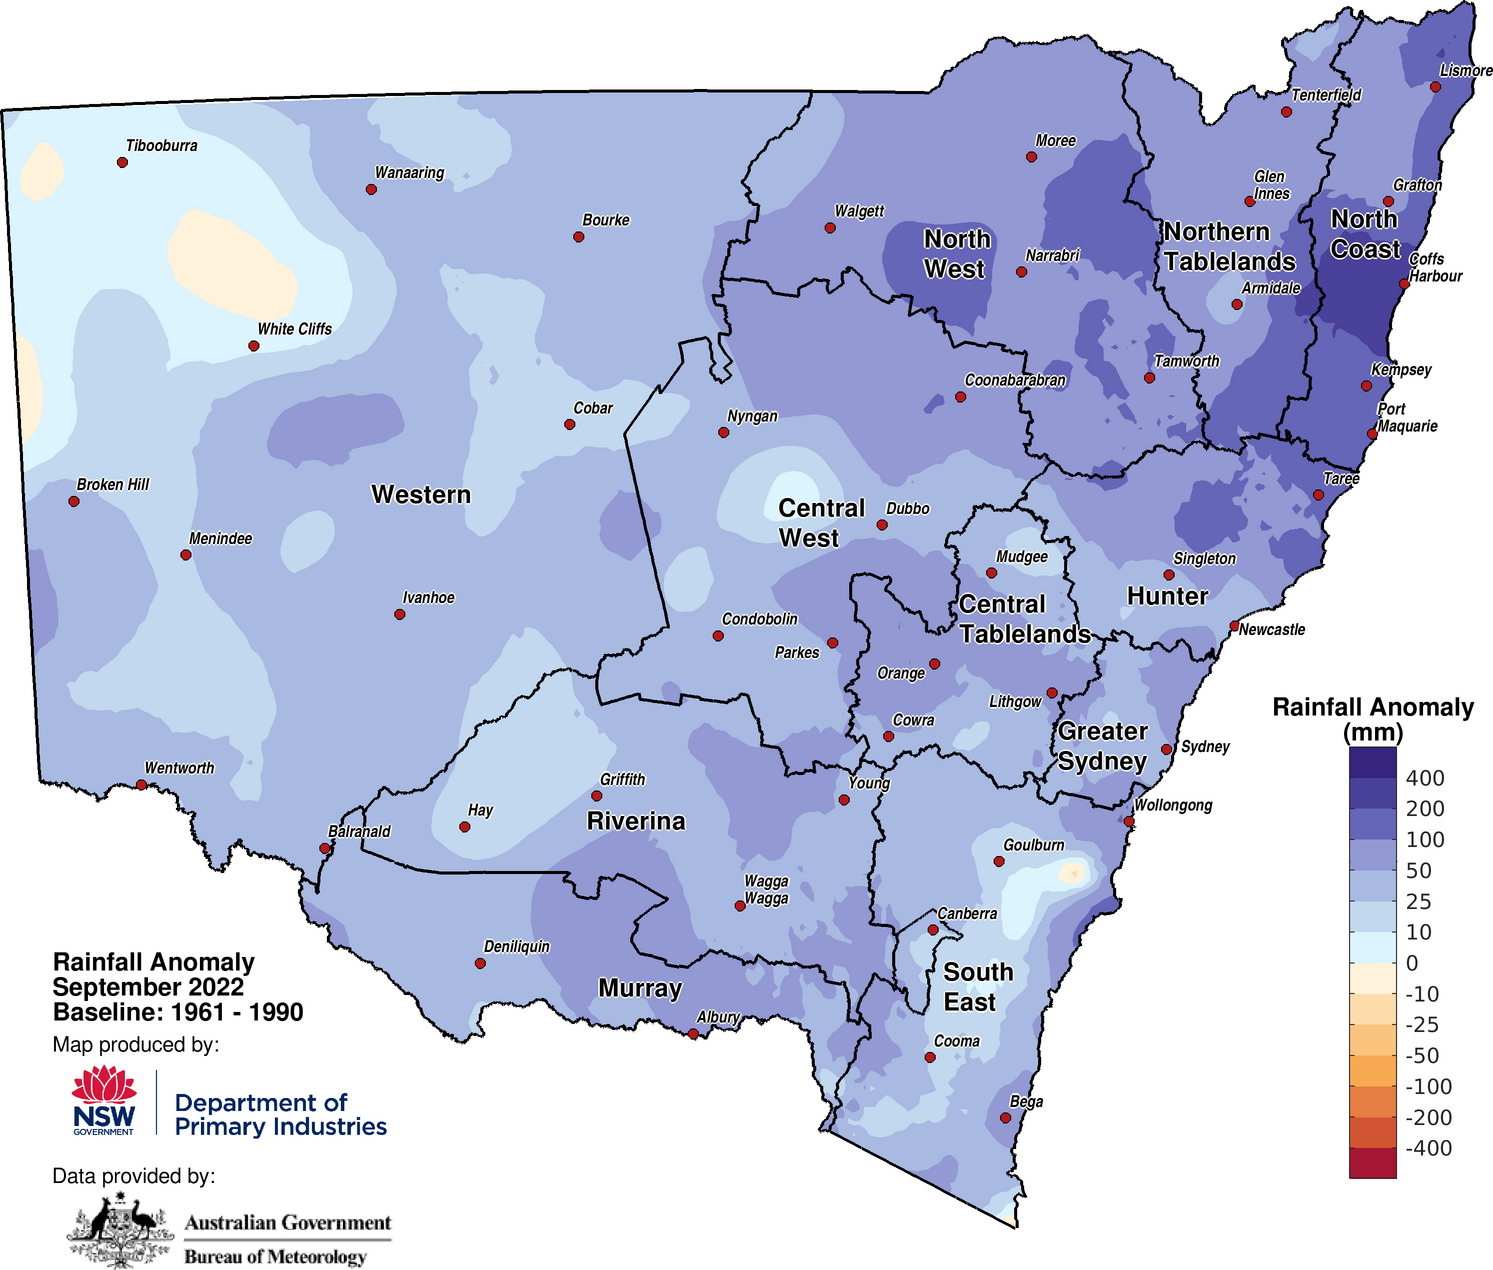 Figure 2a. Rainfall anomaly – September 2022